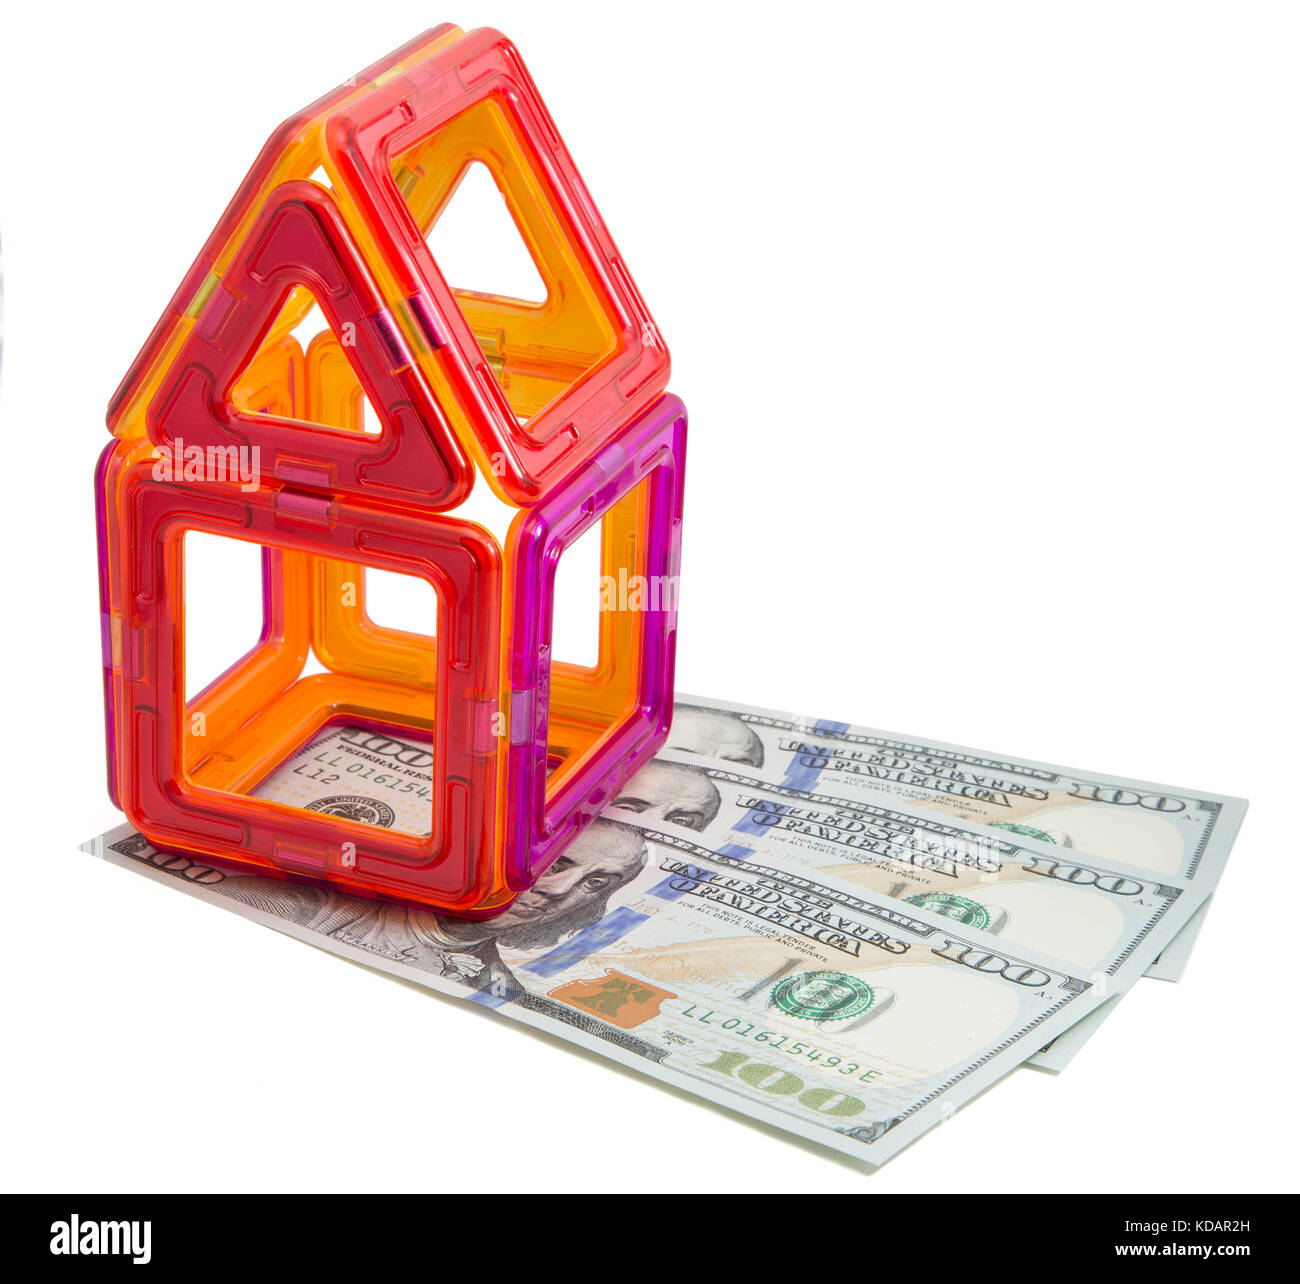 Toy house and money on isolated background Stock Photo